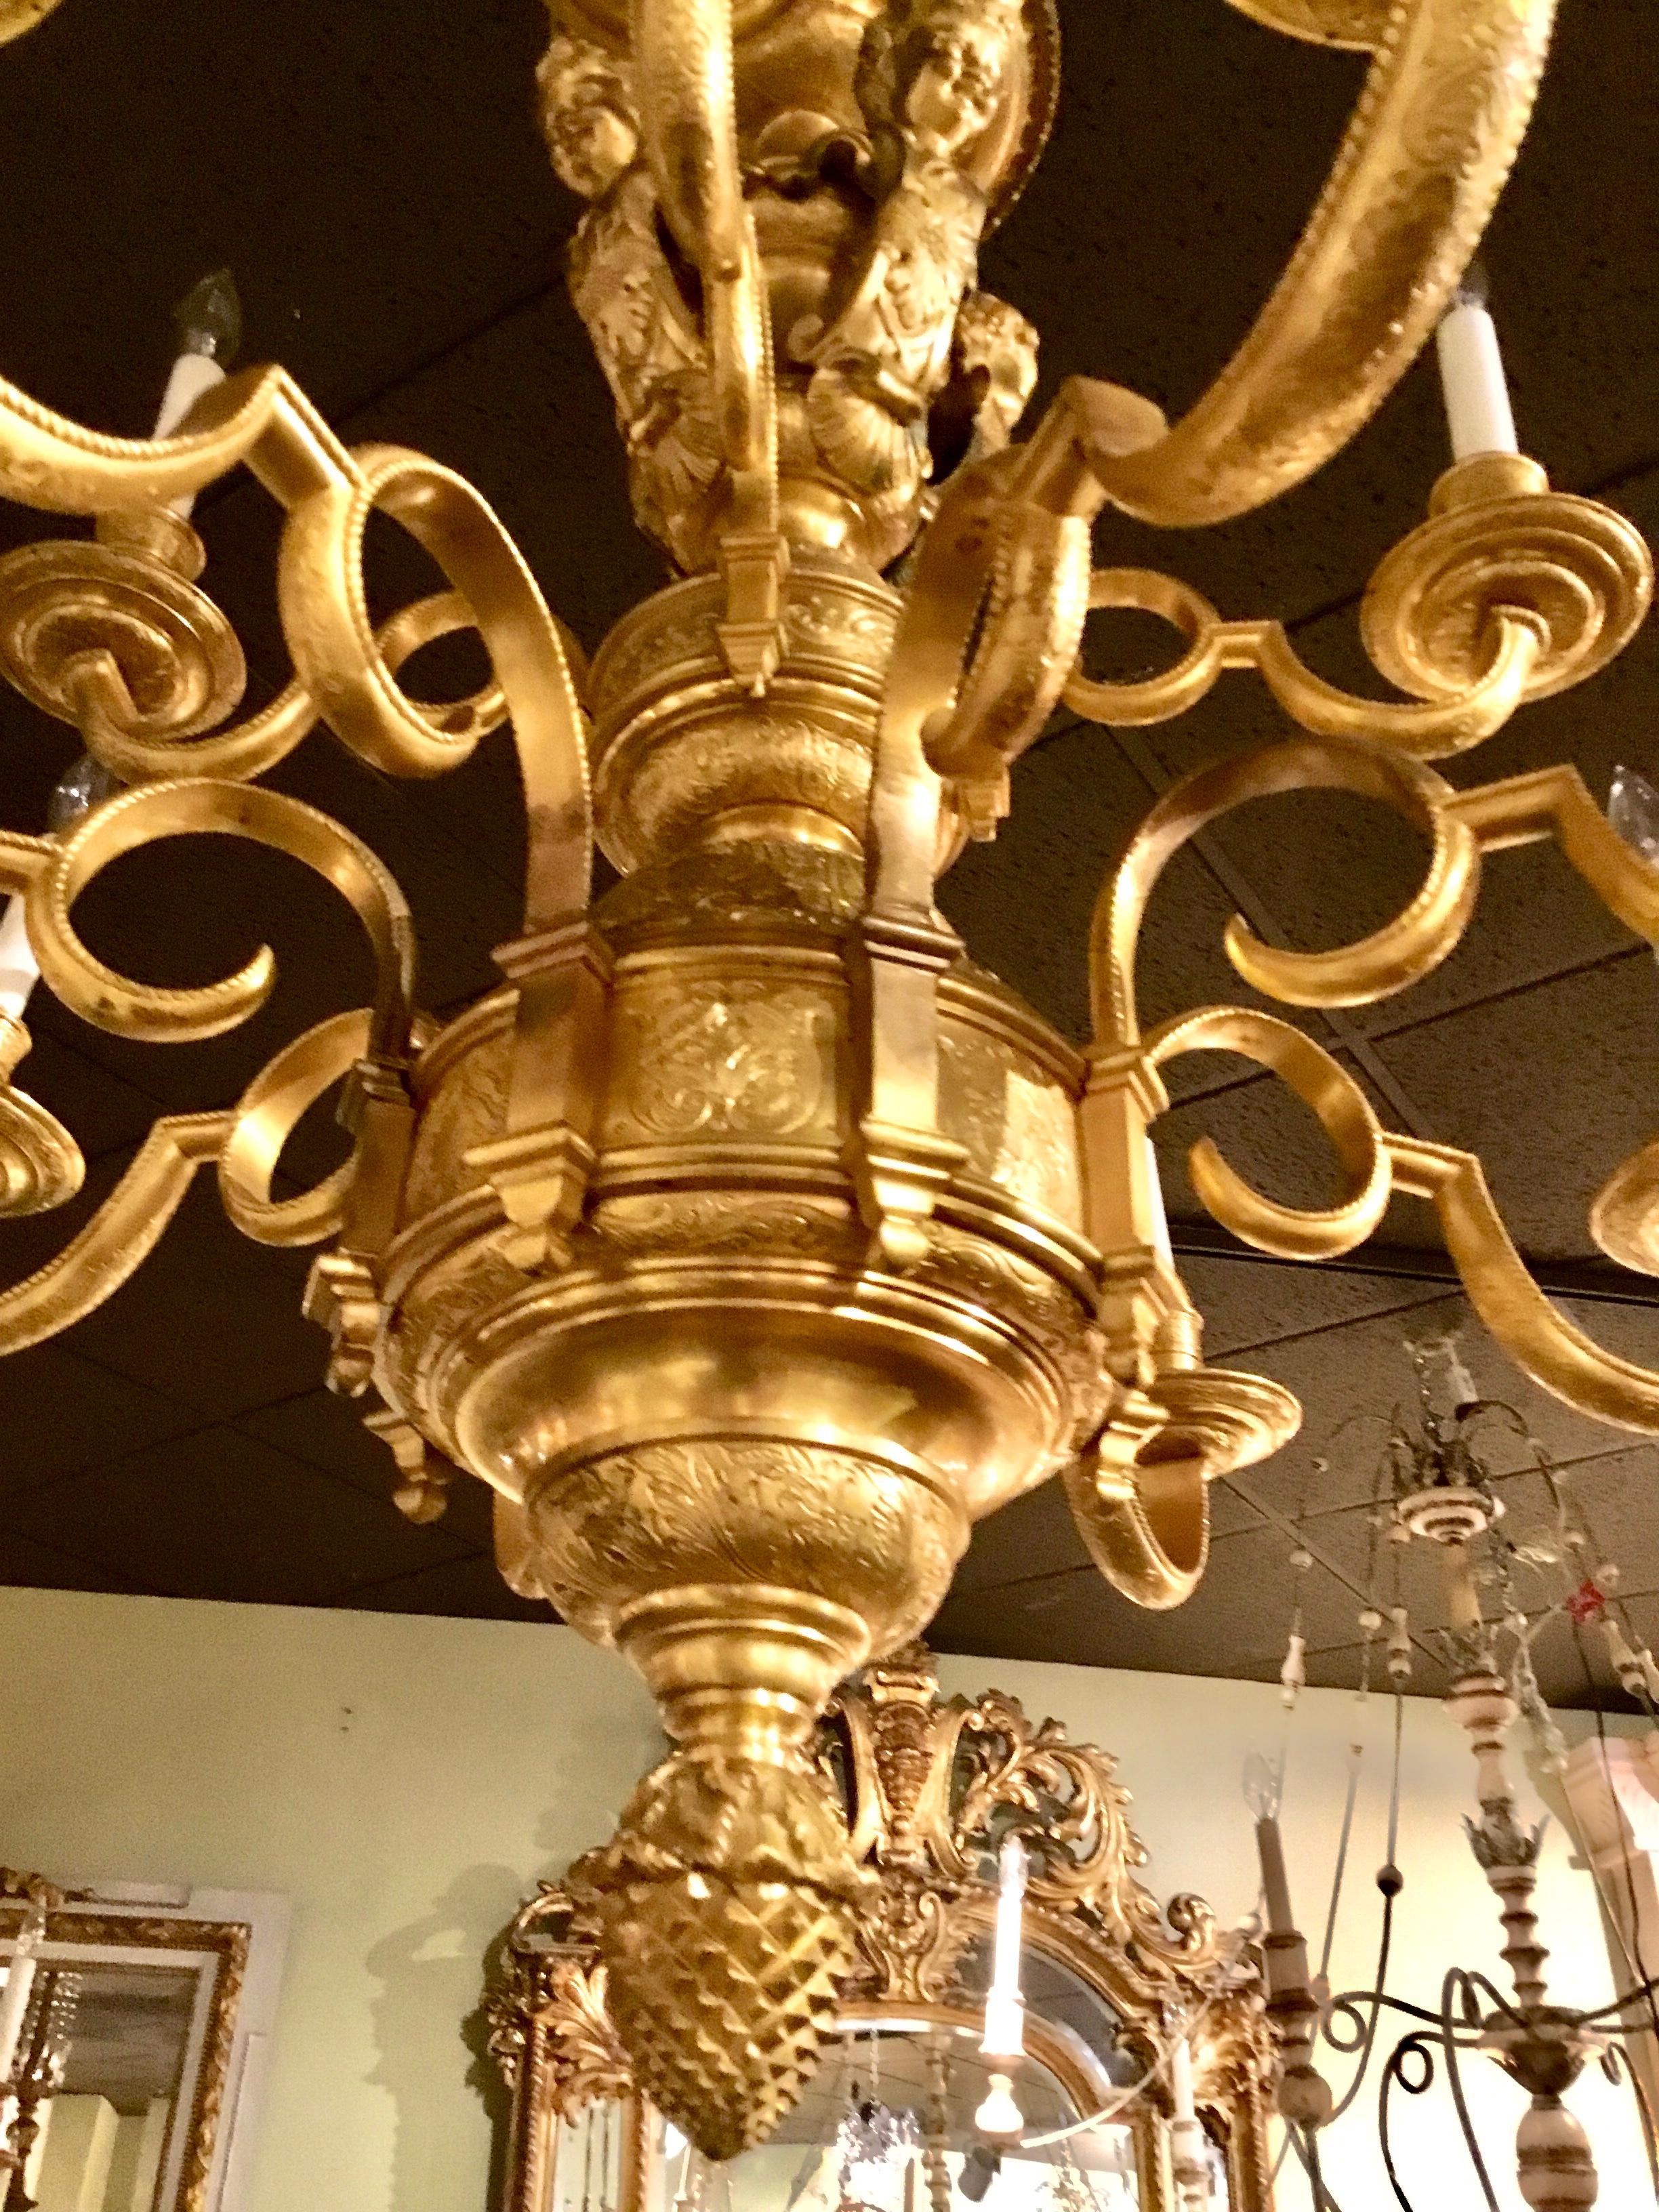 Exceptional gilding on this superb bronze chandelier with twelve-light.
Gilt bronze cherubs decorate the crest of this magnificent chandelier.
Scrolling arms that have engraving support the candles. The acorn finial
at the base is lovely!